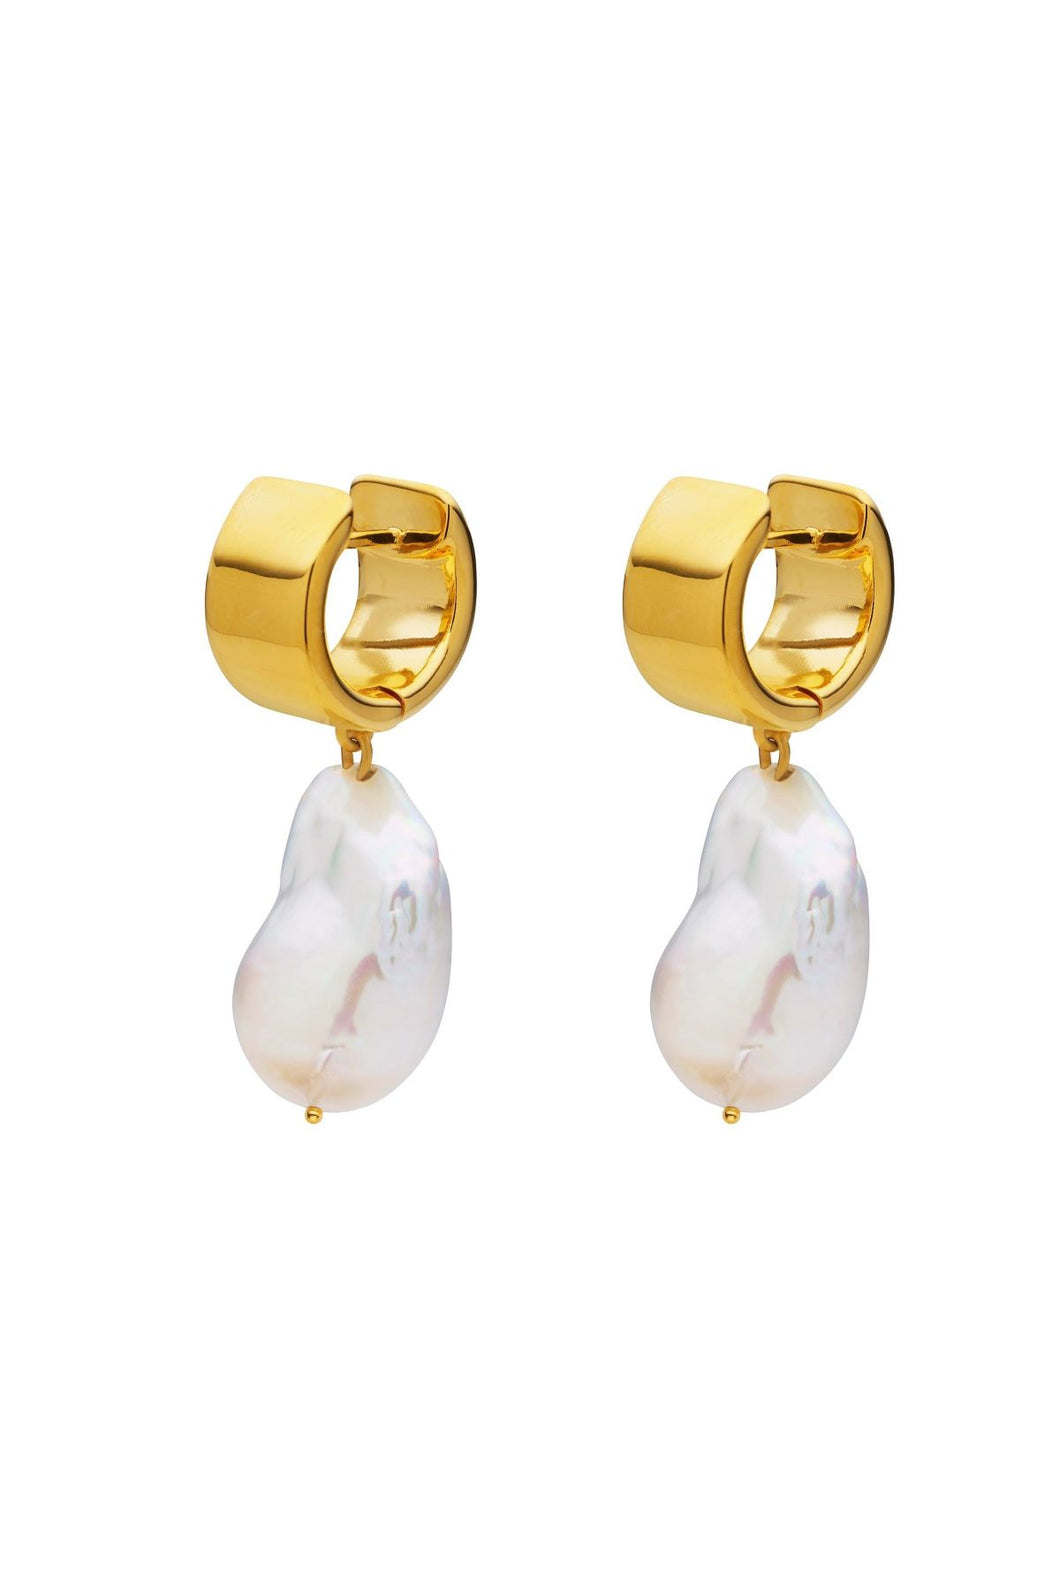 Amber Sceats Maldives Earrings - Gold + Pearl  Hyde Boutique   